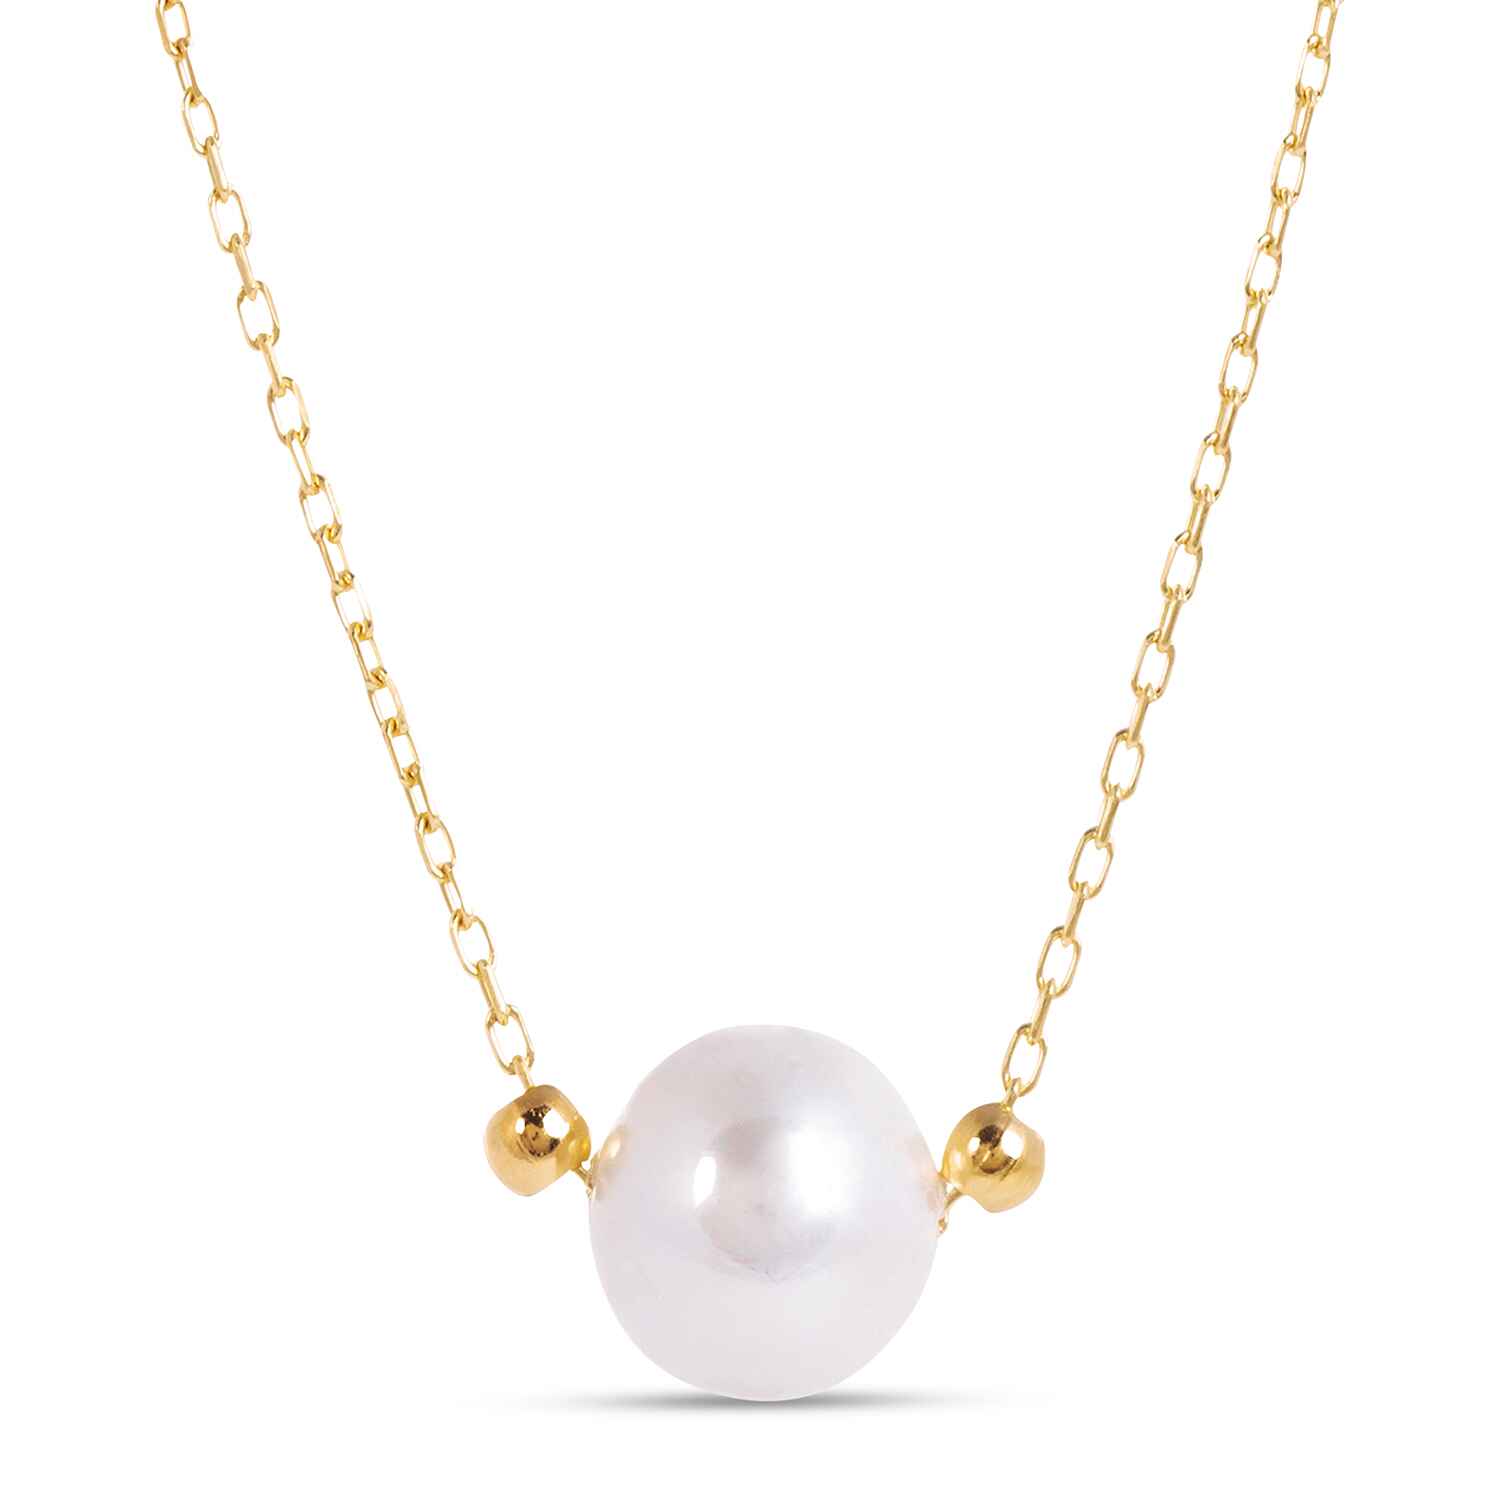 A modern twist on the classic pearl necklace, the Laura Gold Chain Necklace features a vintage white pearl and two gold beads. This very delicate sustainable necklace is all about simplicity.